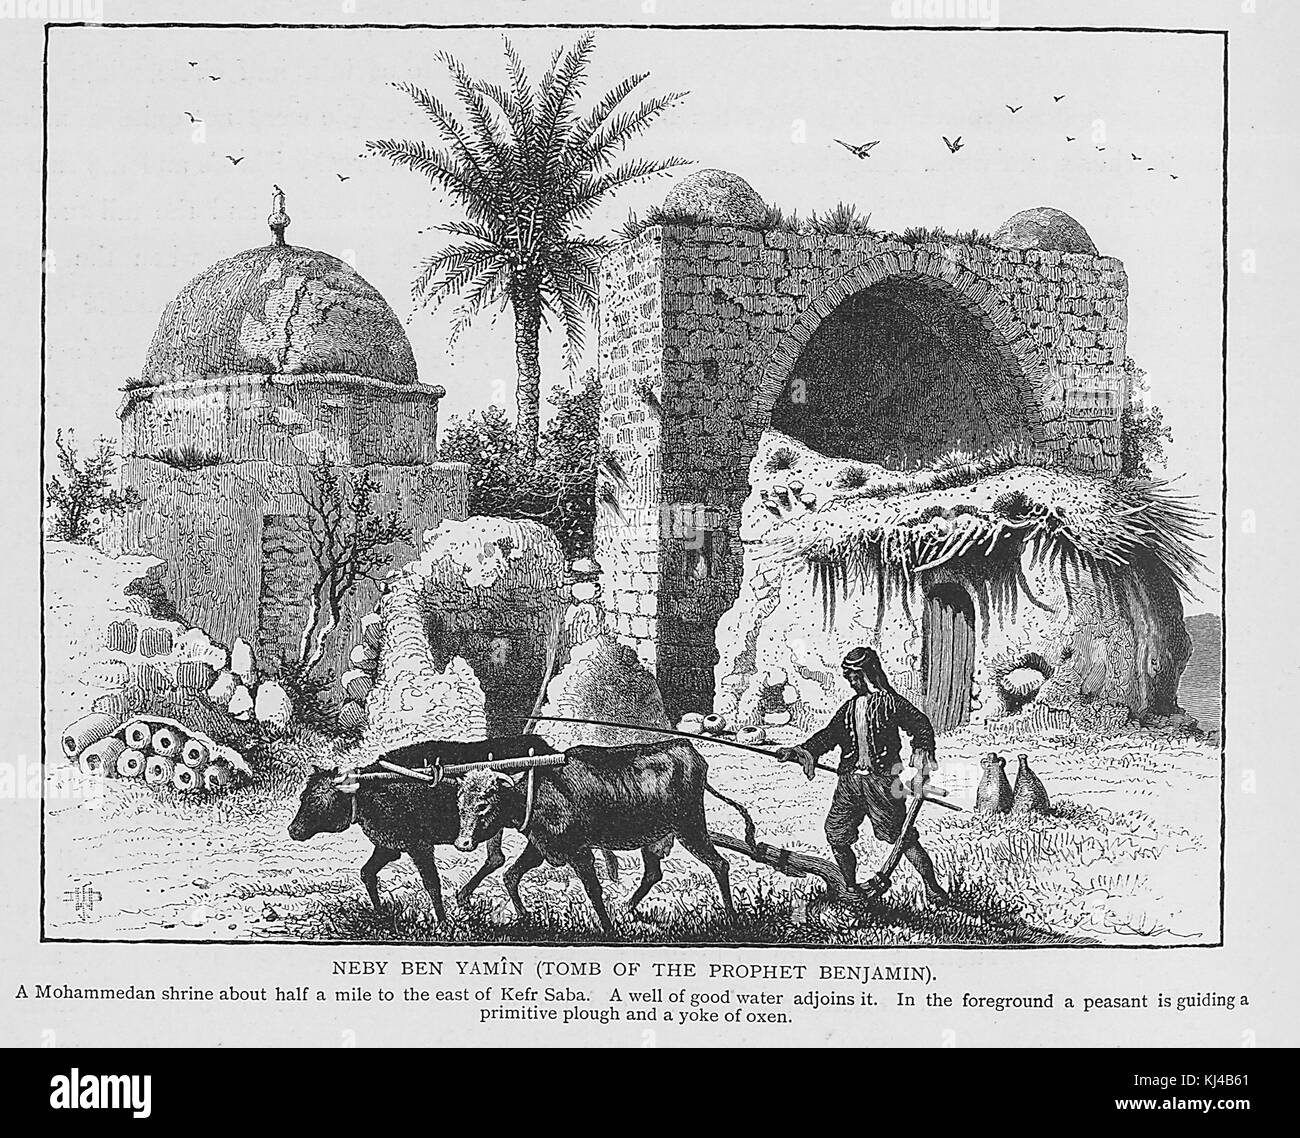 Wood engraving titled Neby ben Yamin (Tomb of the prophet Benjamin), a Mohammaden shrine about half a mile to the east of Kefr Saba, a well of good water adjoins it, in the foreground a peasant is guiding a primitive plough and a yoke of oxen, by John Douglas Woodward, from the book Picturesque Palestine, Sinai, and Egypt, by Sir Charles William Wilson, 1882. From the New York Public Library. Stock Photo